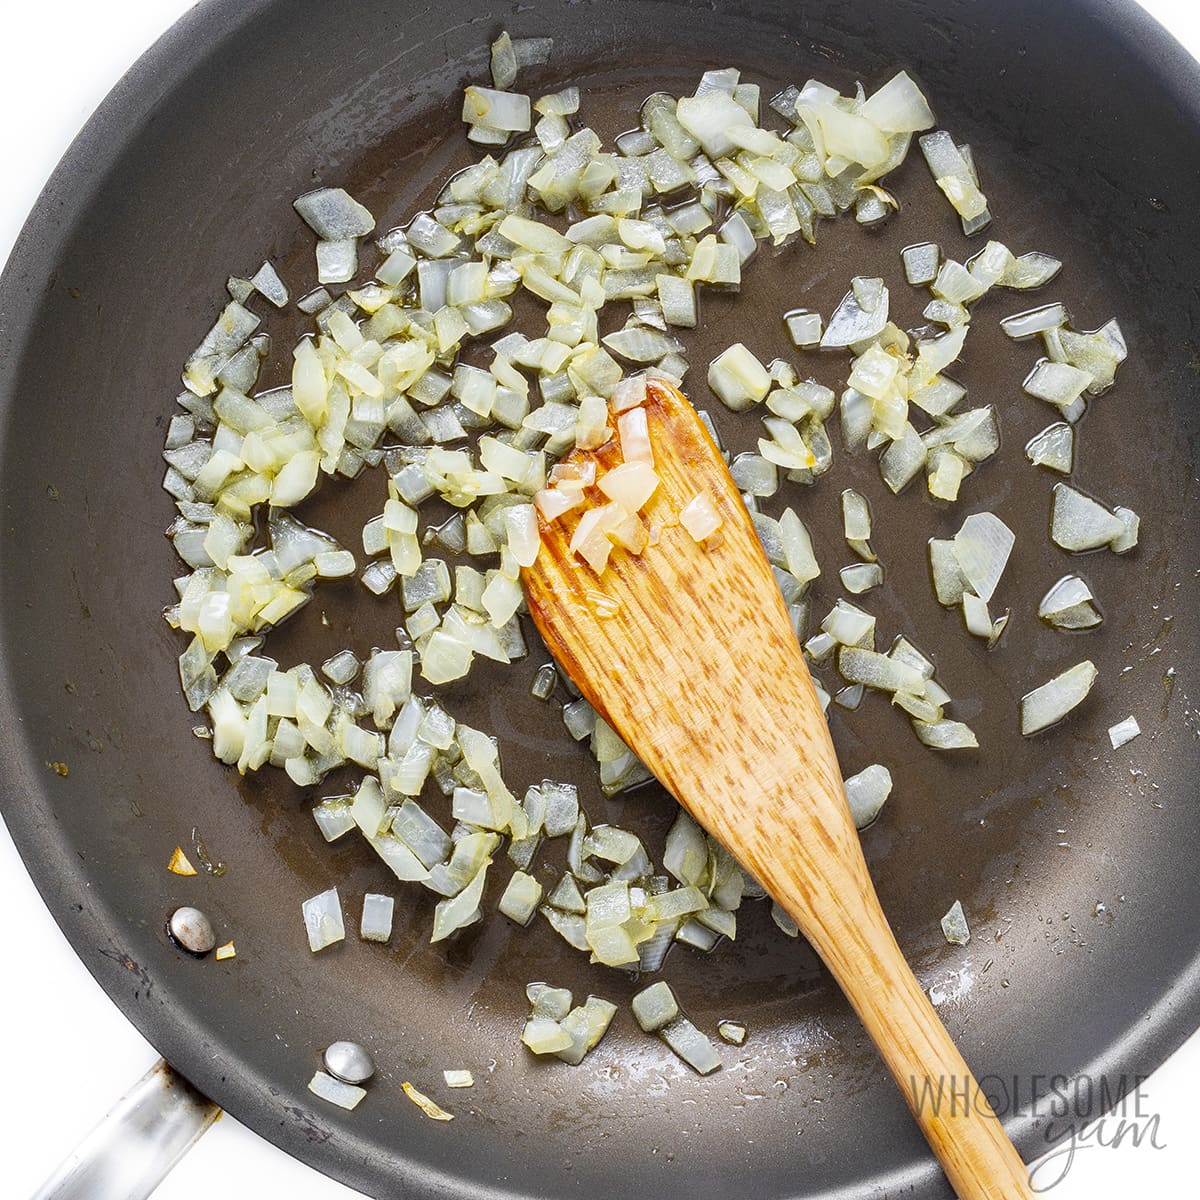 Onions cooked in a pan.